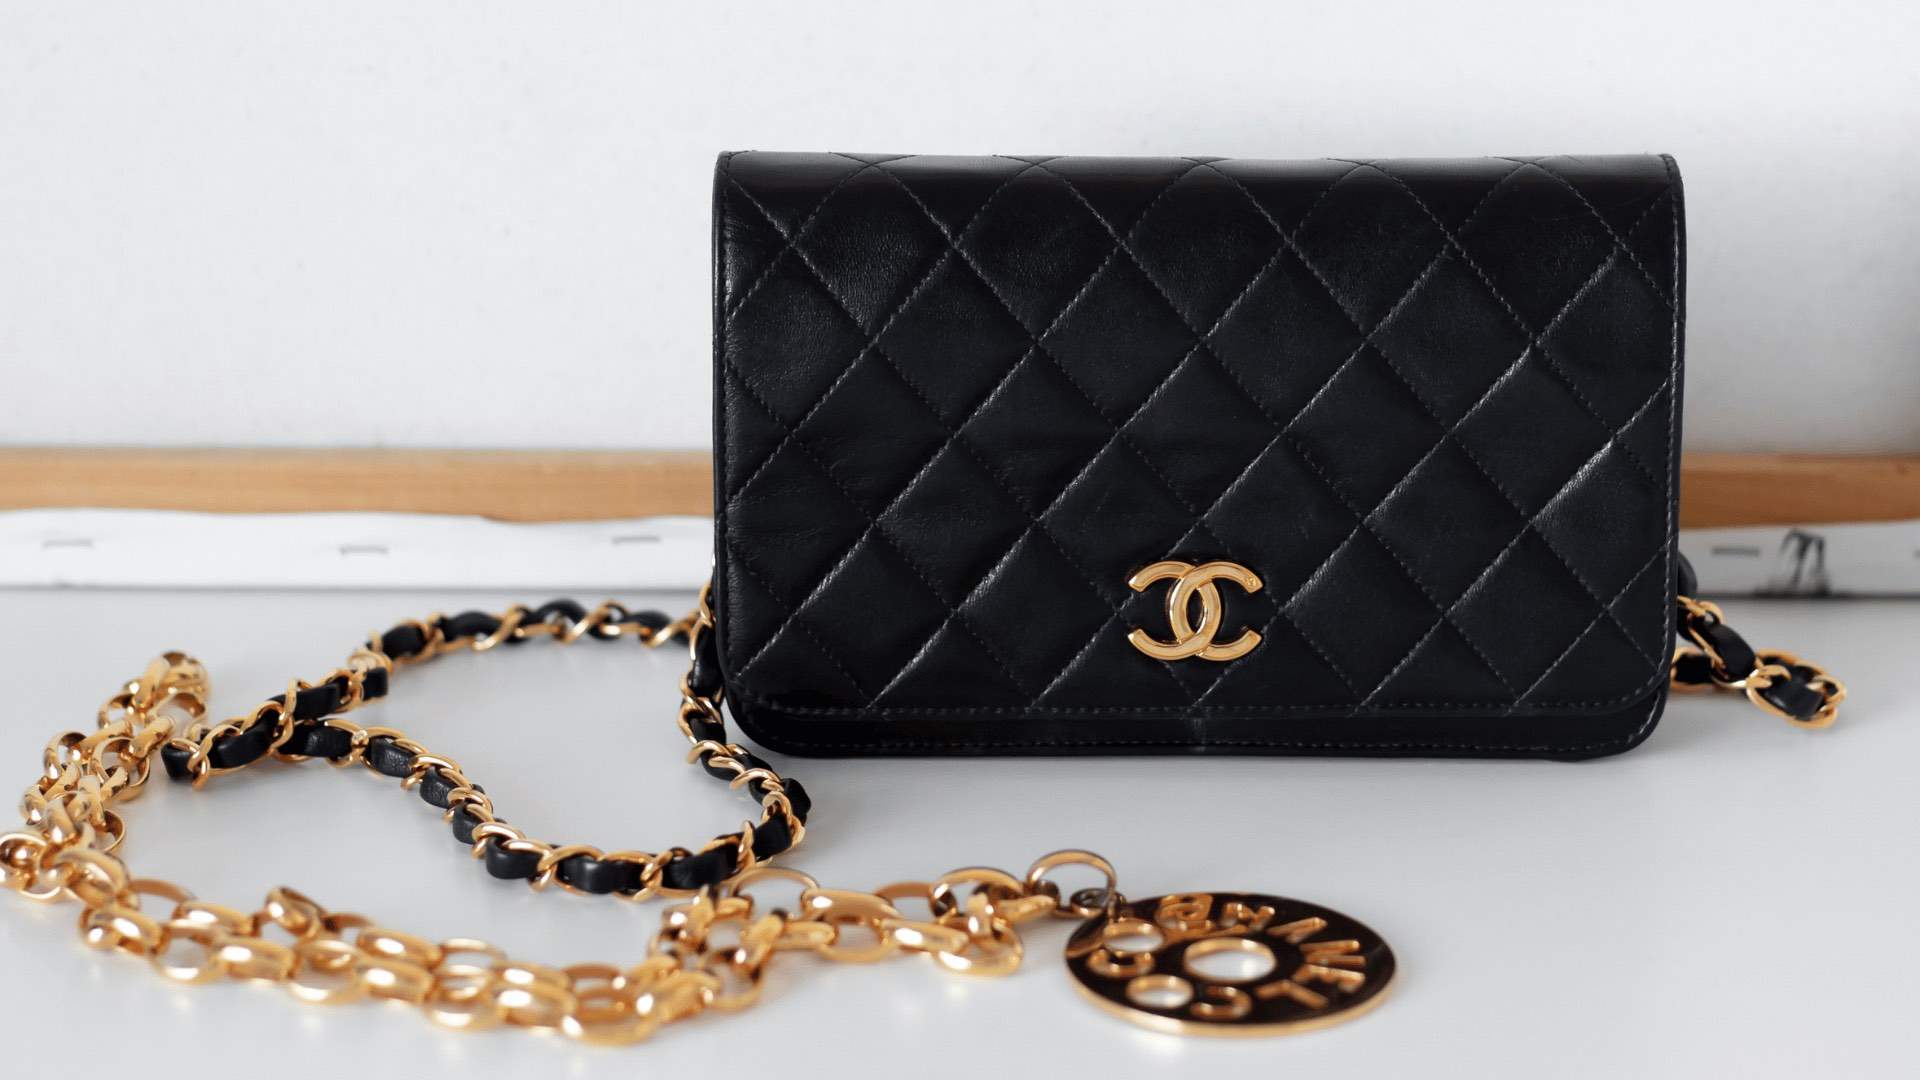 A black Chanel bag and Chanel necklace.